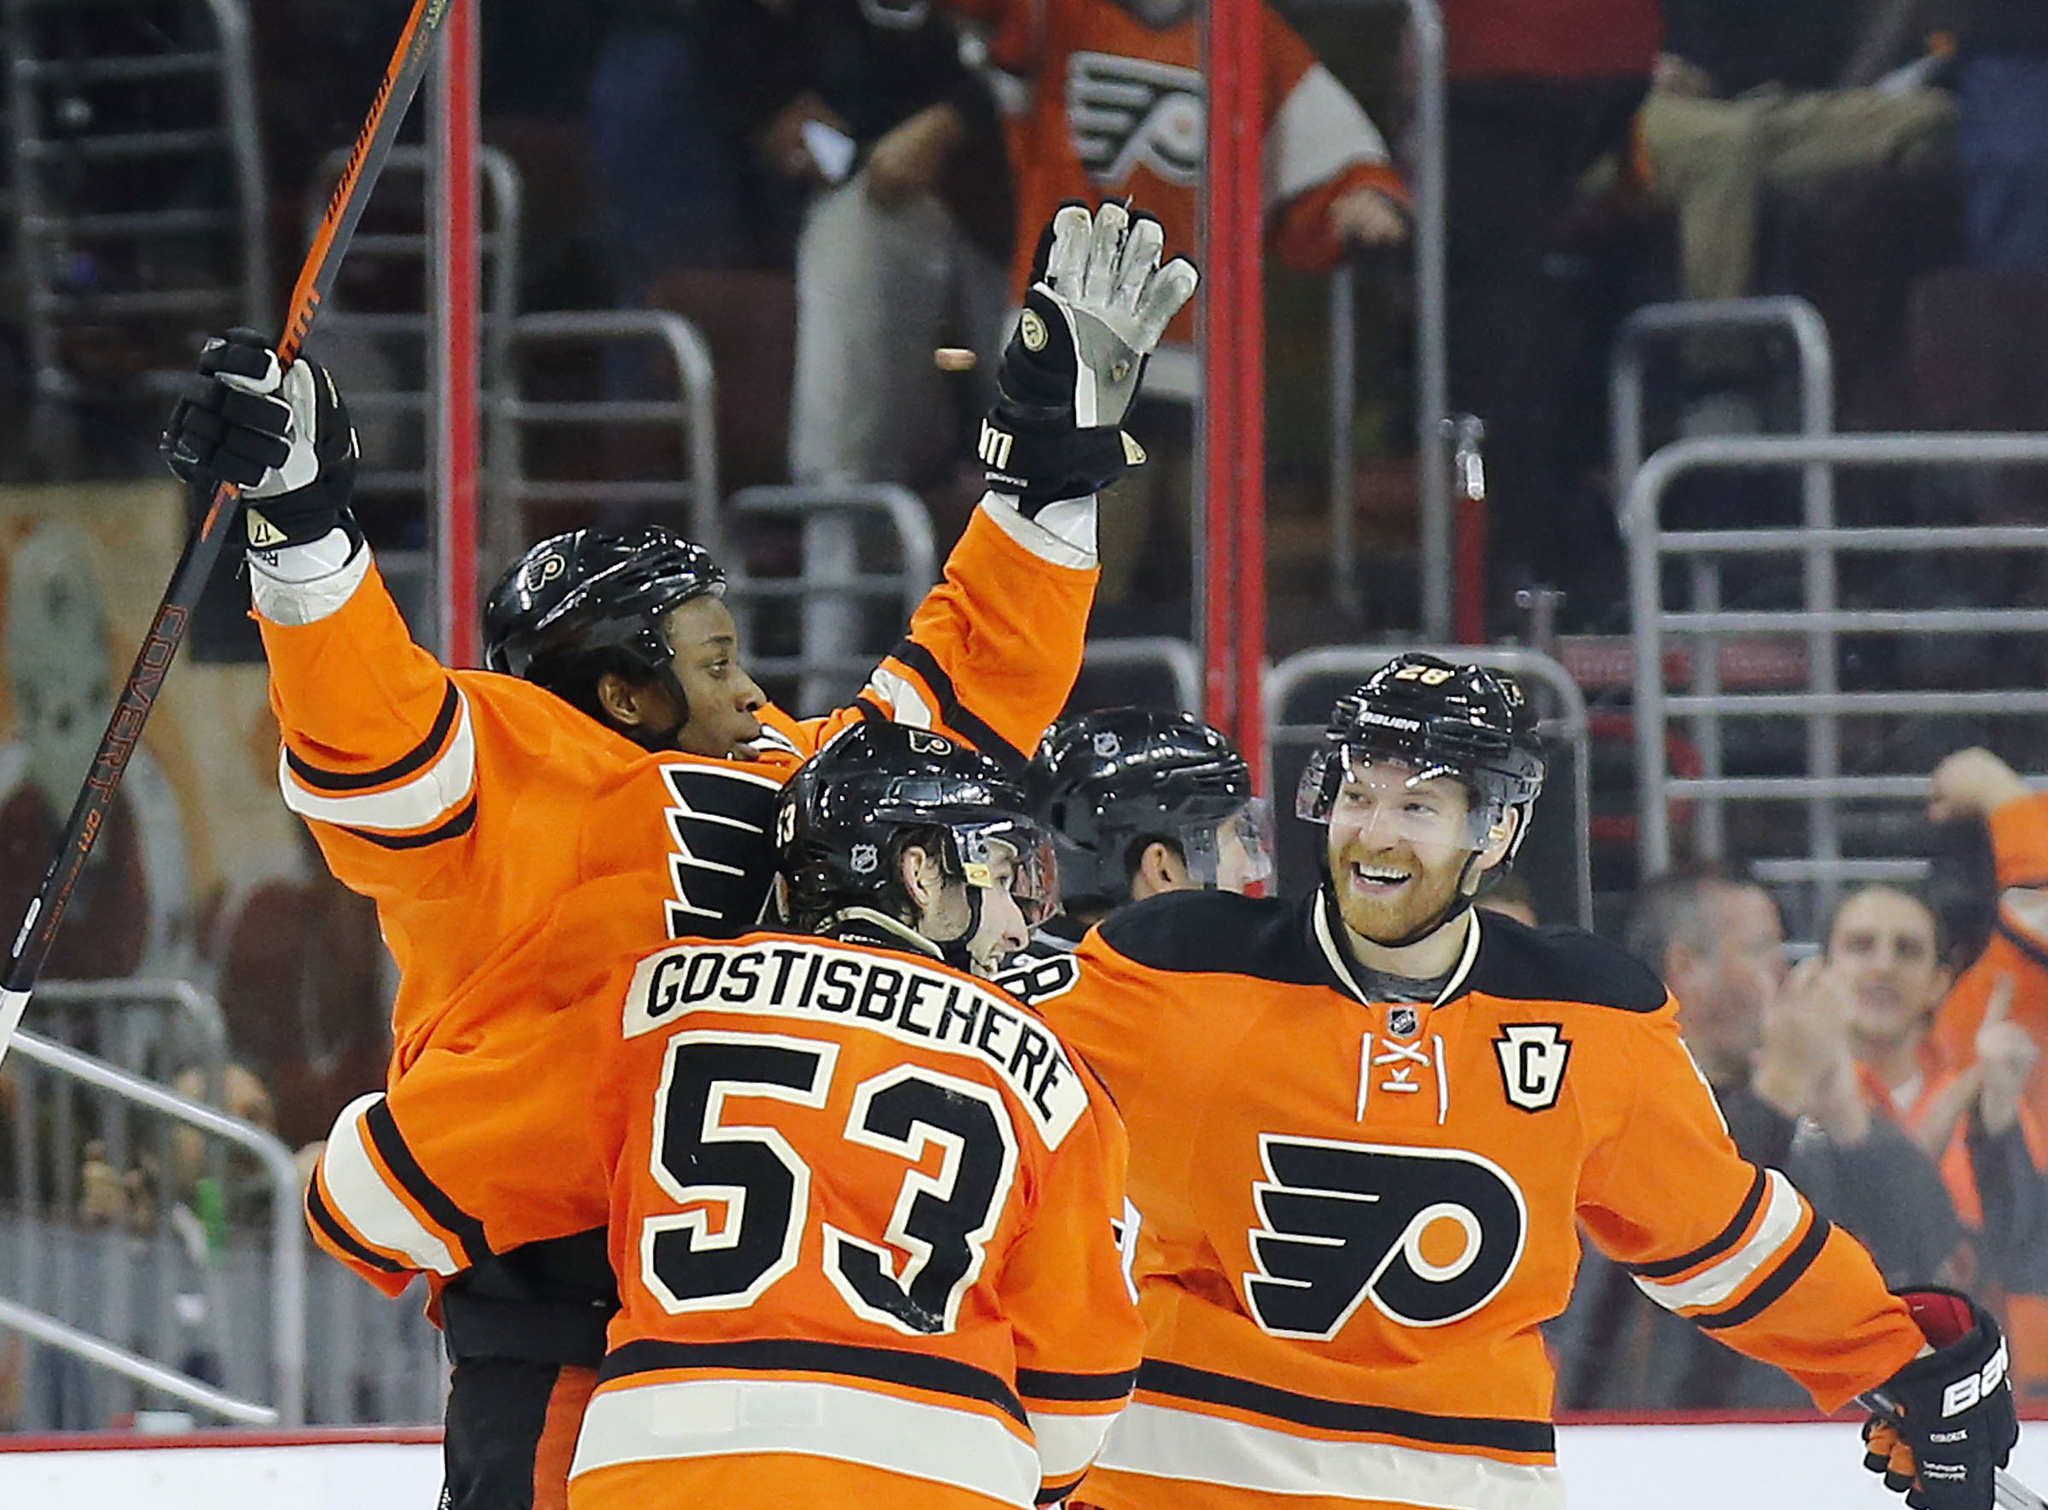 More Than Just A Banana Peel Was Hurled At Philadelphia Flyers